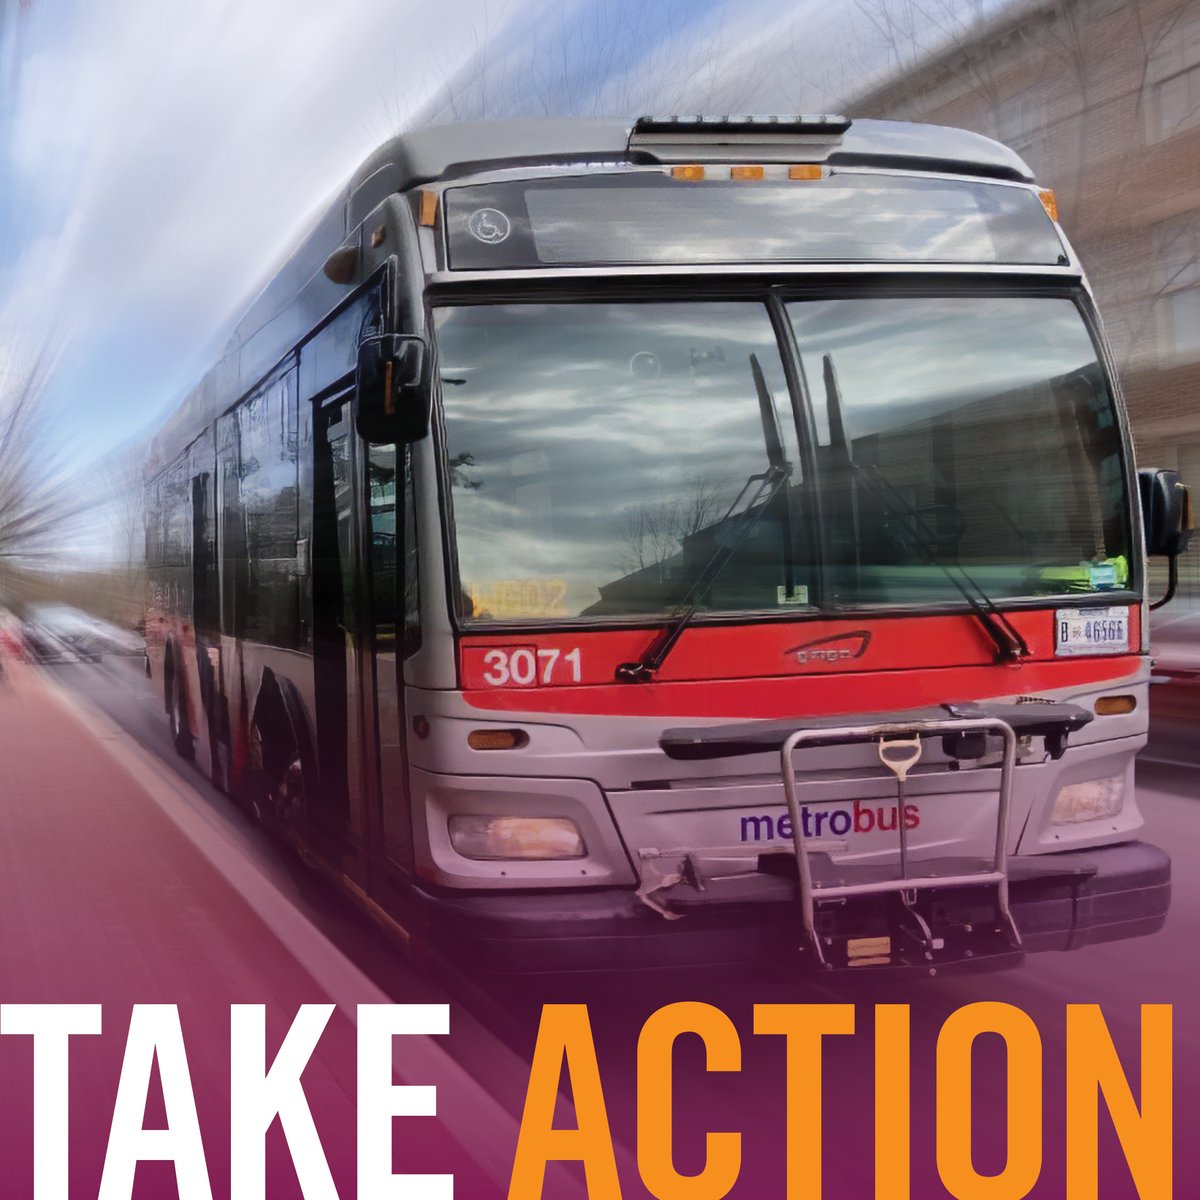 🚨 Prince George's County, unite against WMATA service cuts! Sign the petition to protect 22 bus lines, prevent Silver Line setbacks, and ensure essential services for 50,000+ daily Metro users. Your signature makes a difference: princegeorgescountymd.gov/form/petition-…